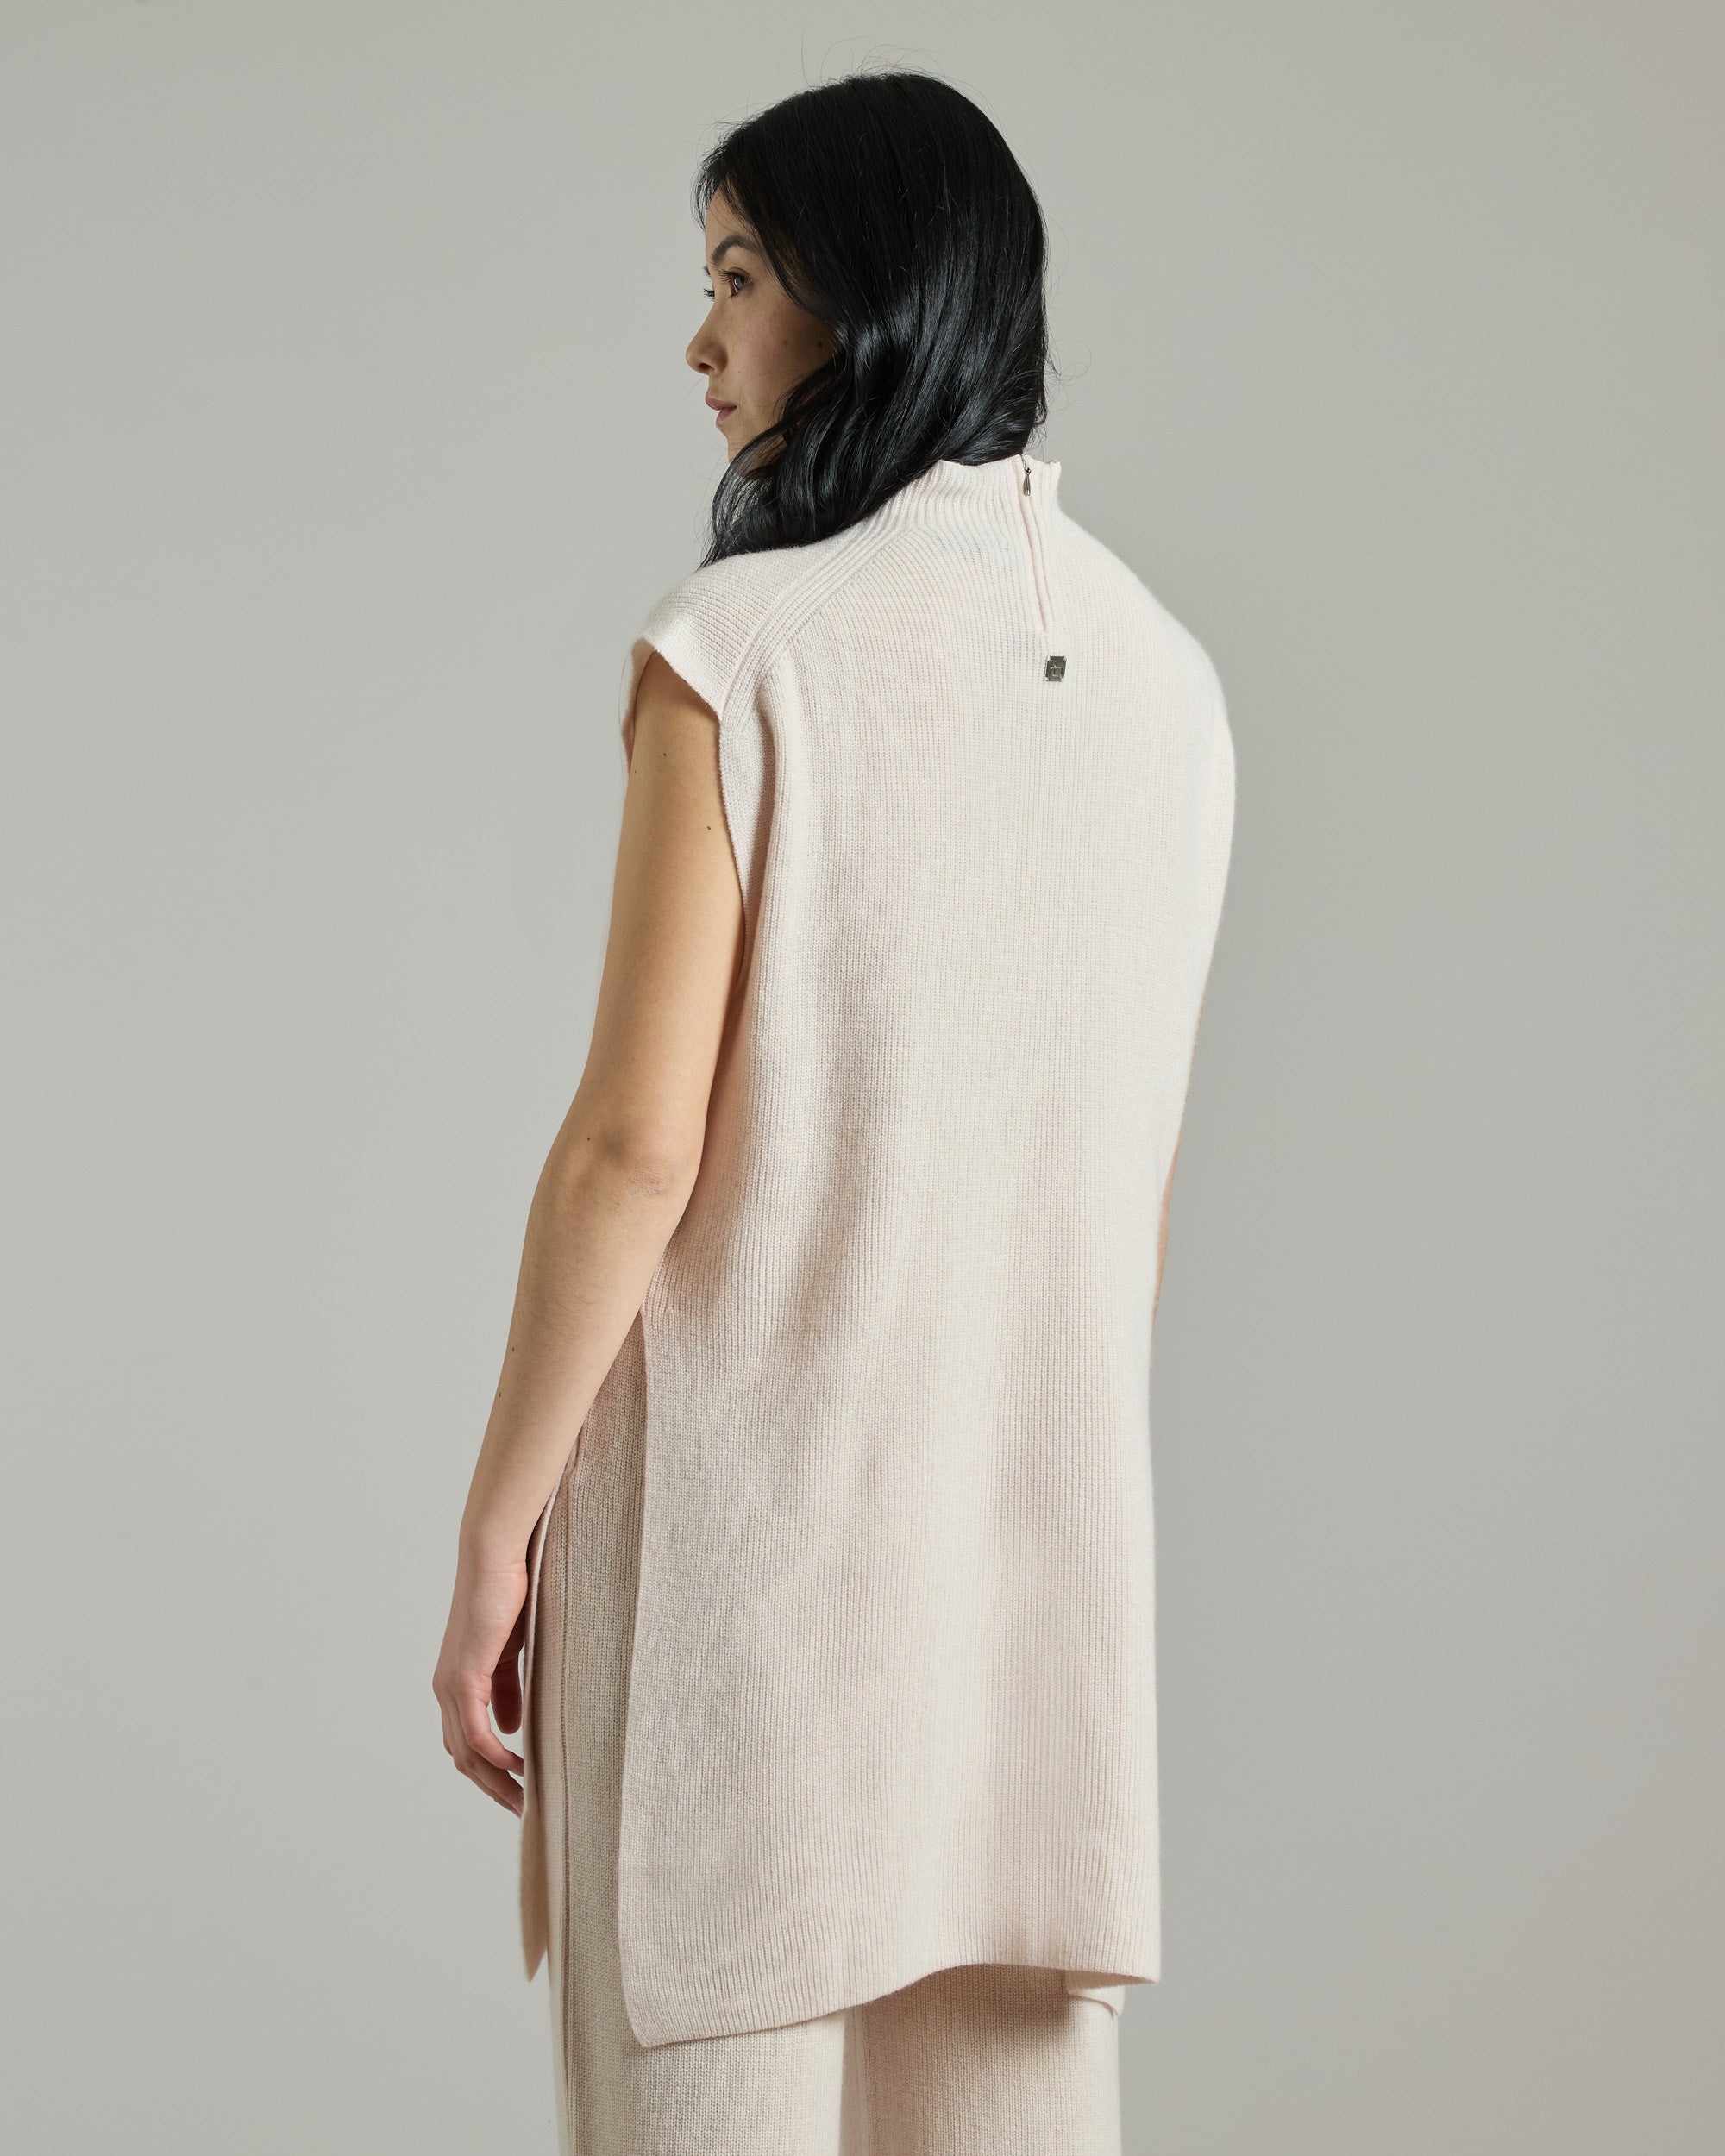 Long Mock Neck Top in Kid Cashmere